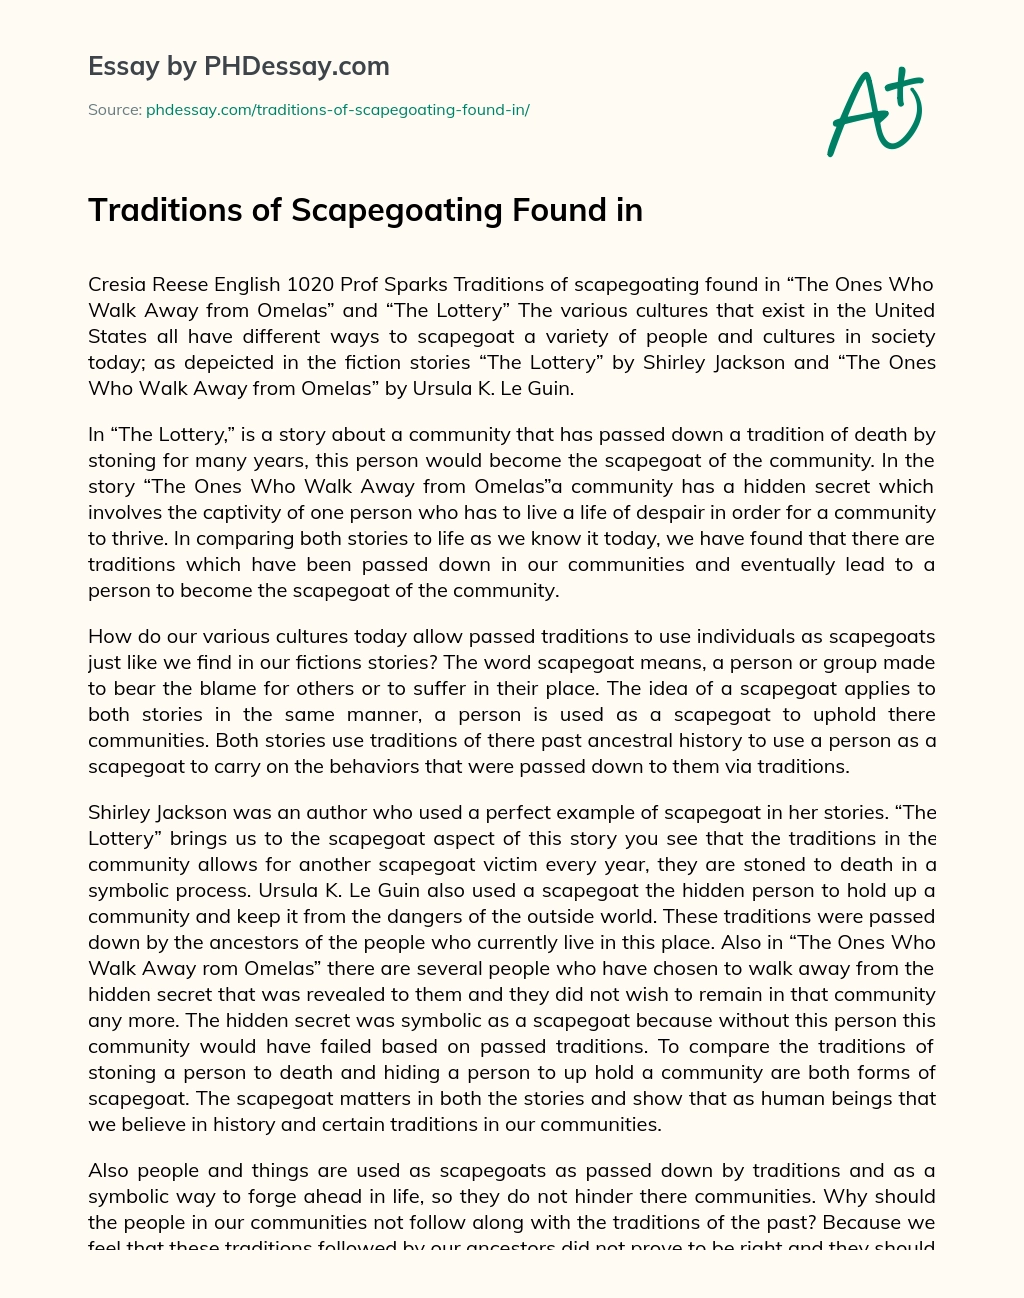 Traditions of Scapegoating Found in essay